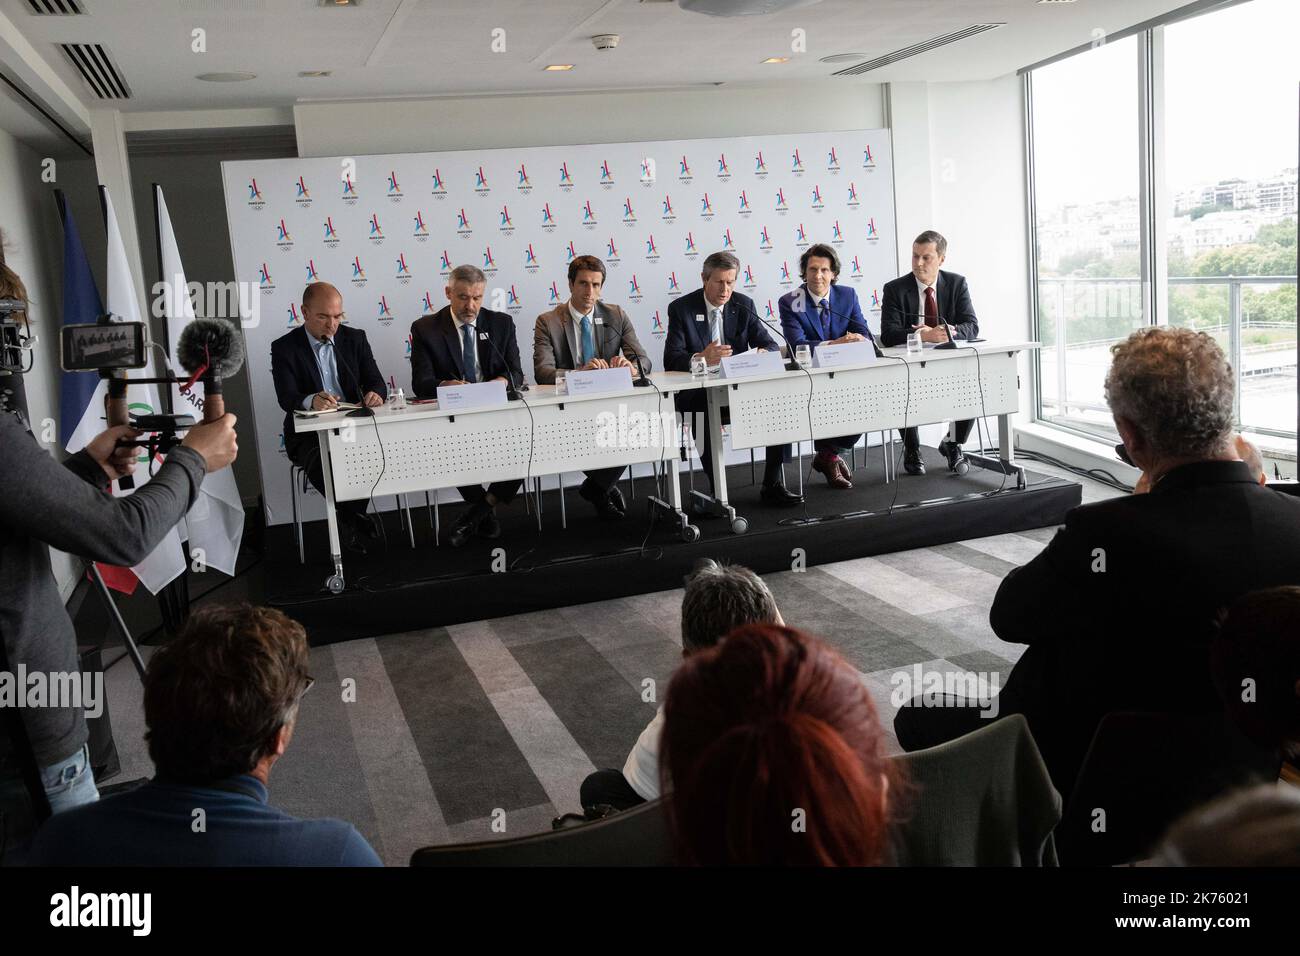 Press conference to make a point on the organization of the Olympic Games in Paris in 2024, on the occasion of the visit of the Coordination Commission of the IOC. In the presence of Etienne Thobois, Director General of the Organizing Committee of the Olympic Games in Paris 2024, Tony Estanguet President of Paris 2024, Pierre-Olivier Beckers-Vieujant President of the Coordination Commission of the Games, Christophe Dubi Director of Sports of the IOC, in Paris, on june 18, 2018. Stock Photo